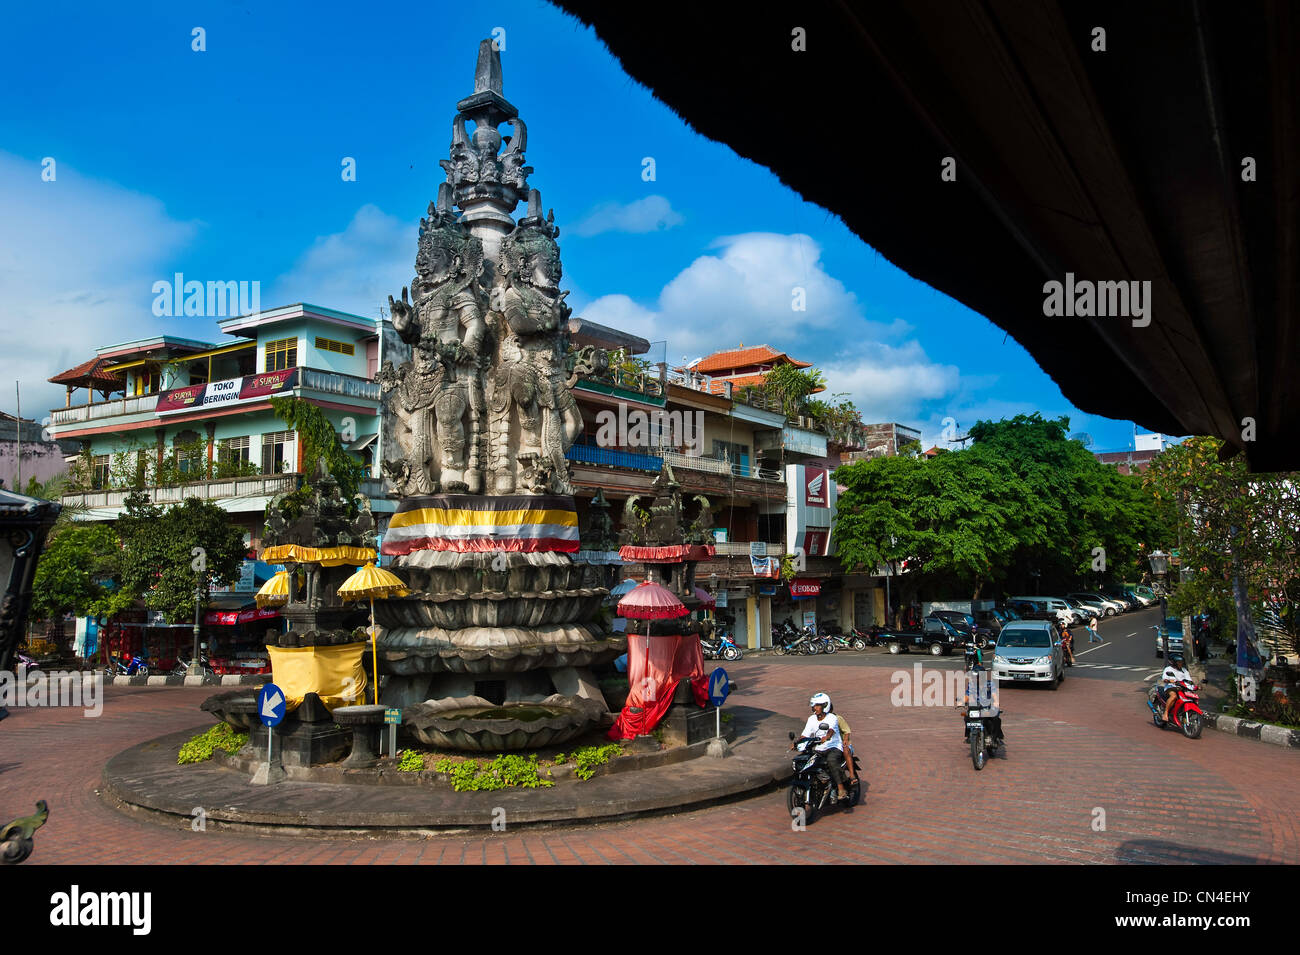 Indonesia, Bali Island, Klungkung town Stock Photo